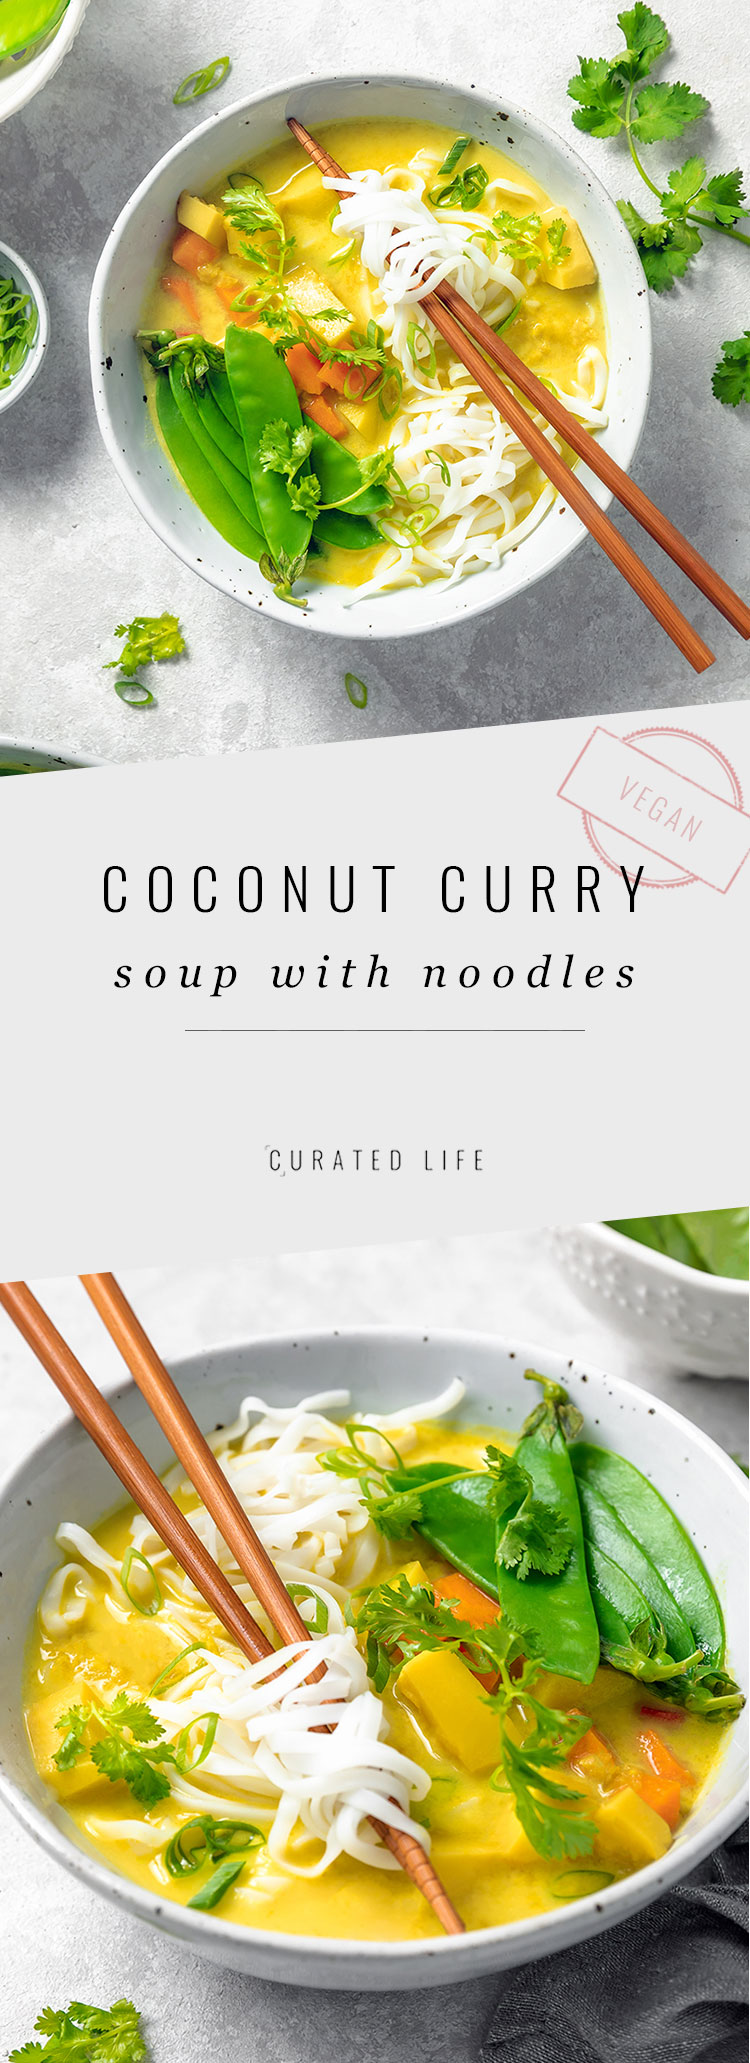 Delicious vegetable Coconut Curry Soup with potato & noodles.

#curry #soup #recipe #coconut #vegetarian #vegan #gluten-free #healthy